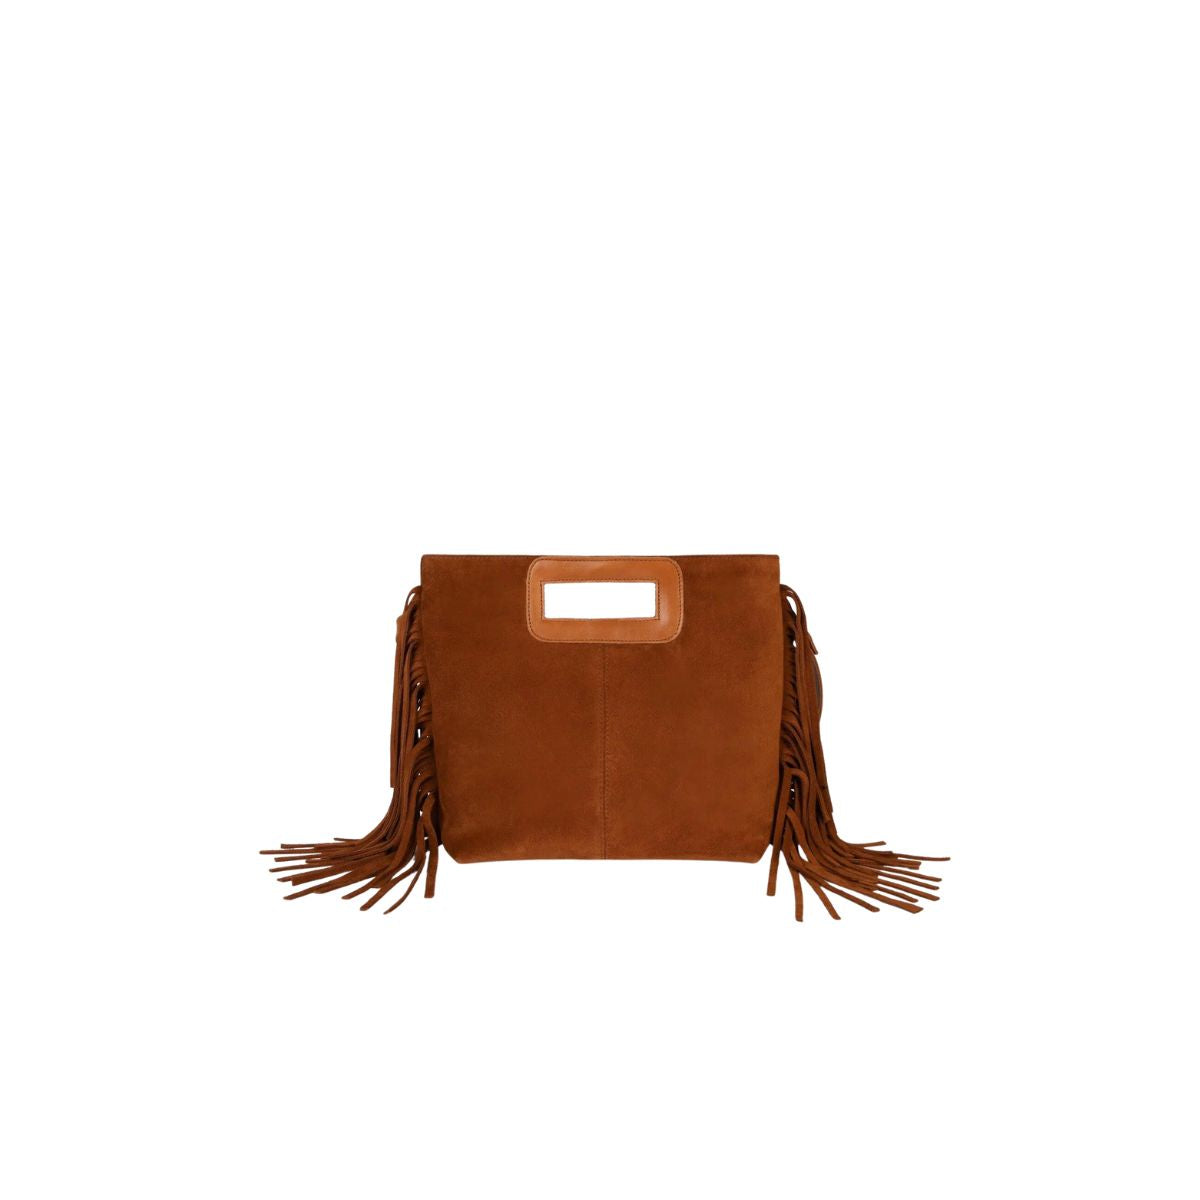 Suede Fringe Purse with Removable Strap